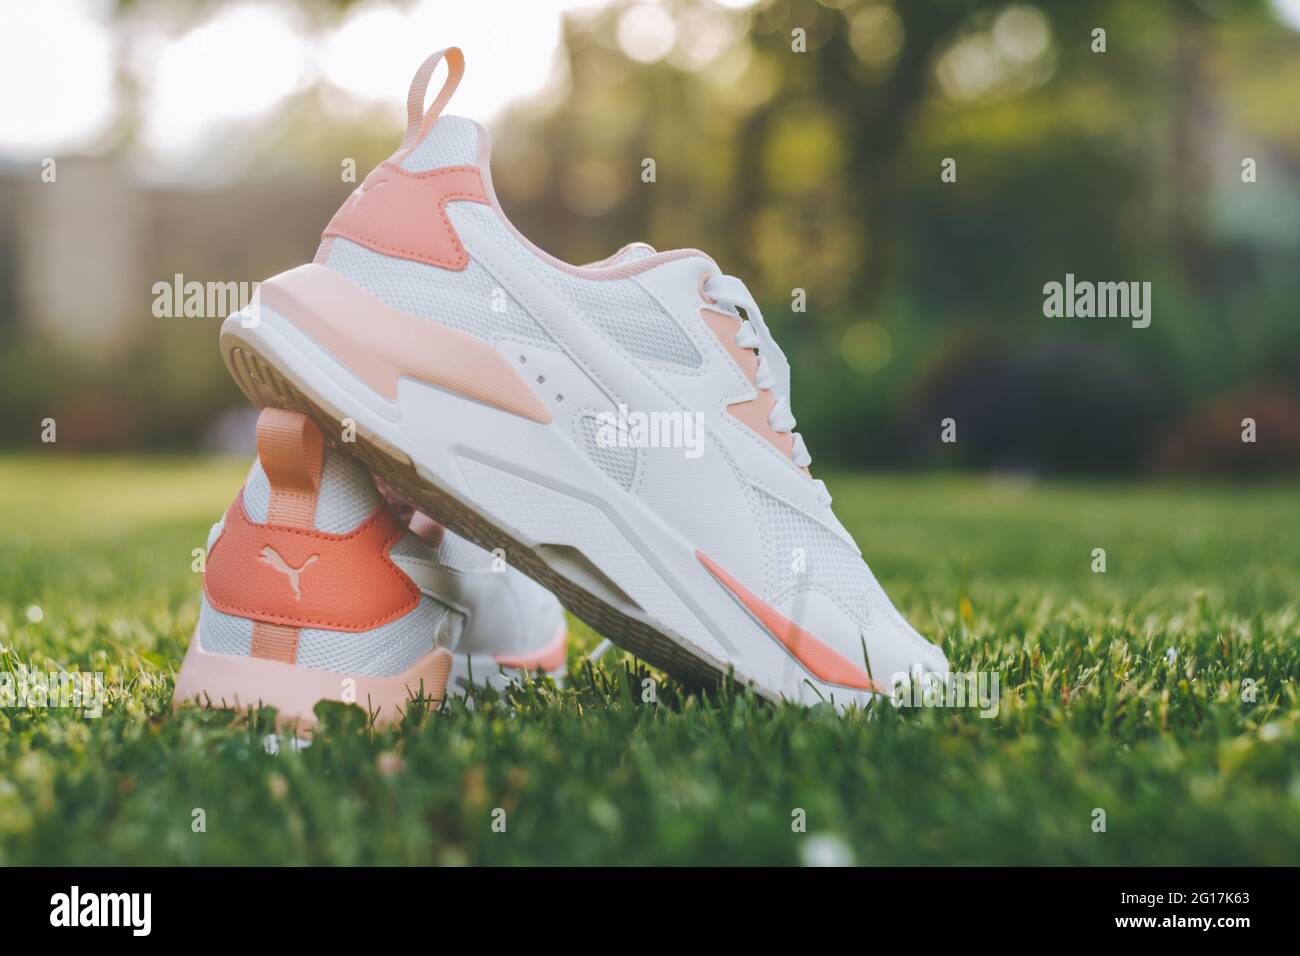 Minsk, Belarus, 23.05.2021: White women's PUMA sneakers with coral inserts  stand on grass in rays of sunlight Stock Photo - Alamy